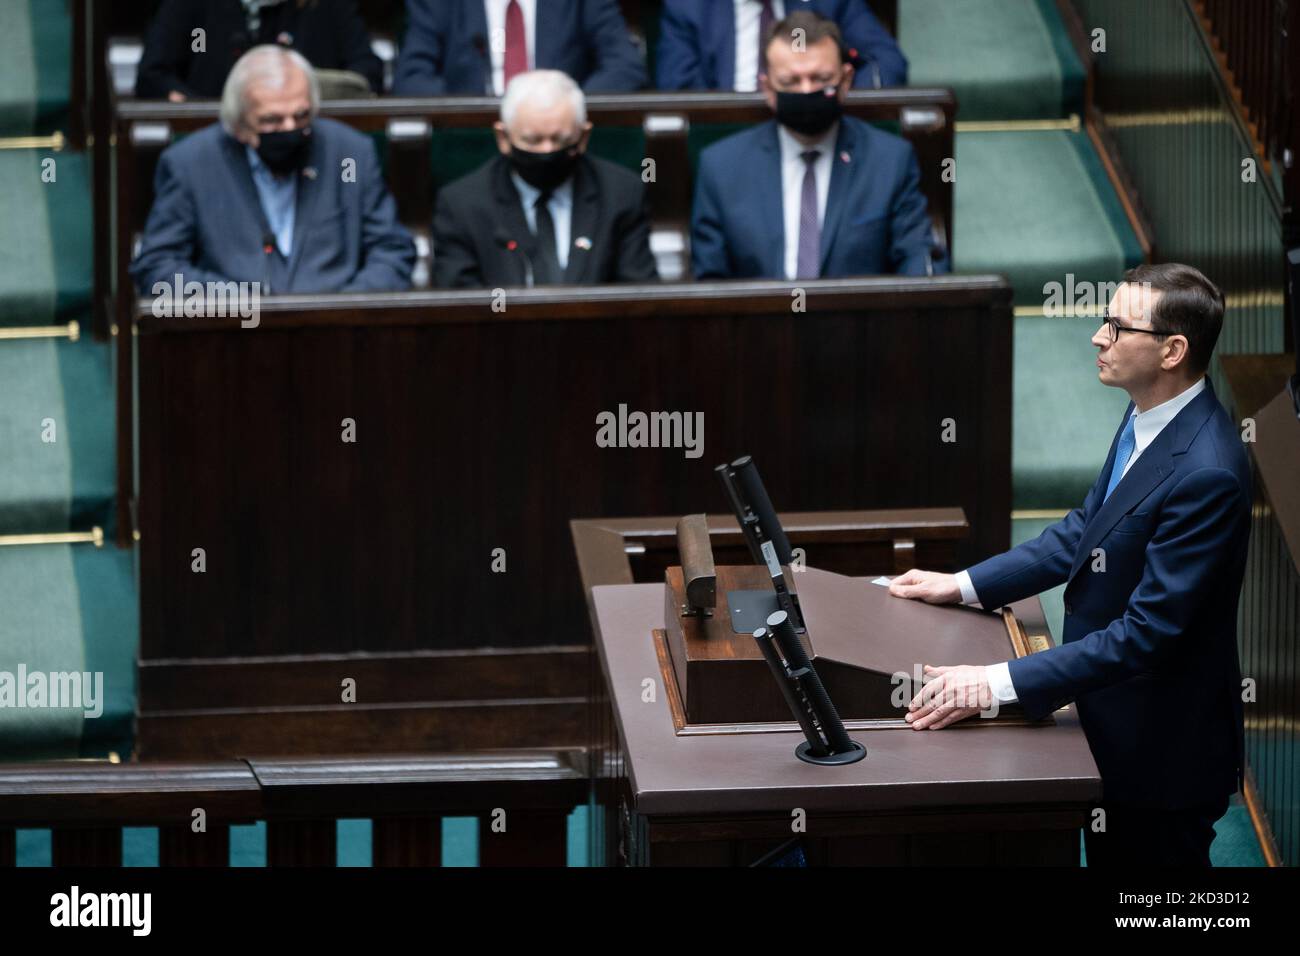 Leader of the Polish Law and Justice (PiS) ruling party Jaroslaw Kaczynski (C), Polish Deputy Sejm Speaker Ryszard Terlecki (L) and Polish Defense Minister Mariusz Blaszczak (R), Prime Minister Mateusz Morawiecki (Front), during the 49th session of the Sejm (lower house) in Warsaw, Poland, on 24 February 2022. Polish Parliament has passed a resolution condemning Russian aggression against Ukraine and calling on the international community to impose tough sanctions on Moscow. (Photo by Mateusz Wlodarczyk/NurPhoto) Stock Photo